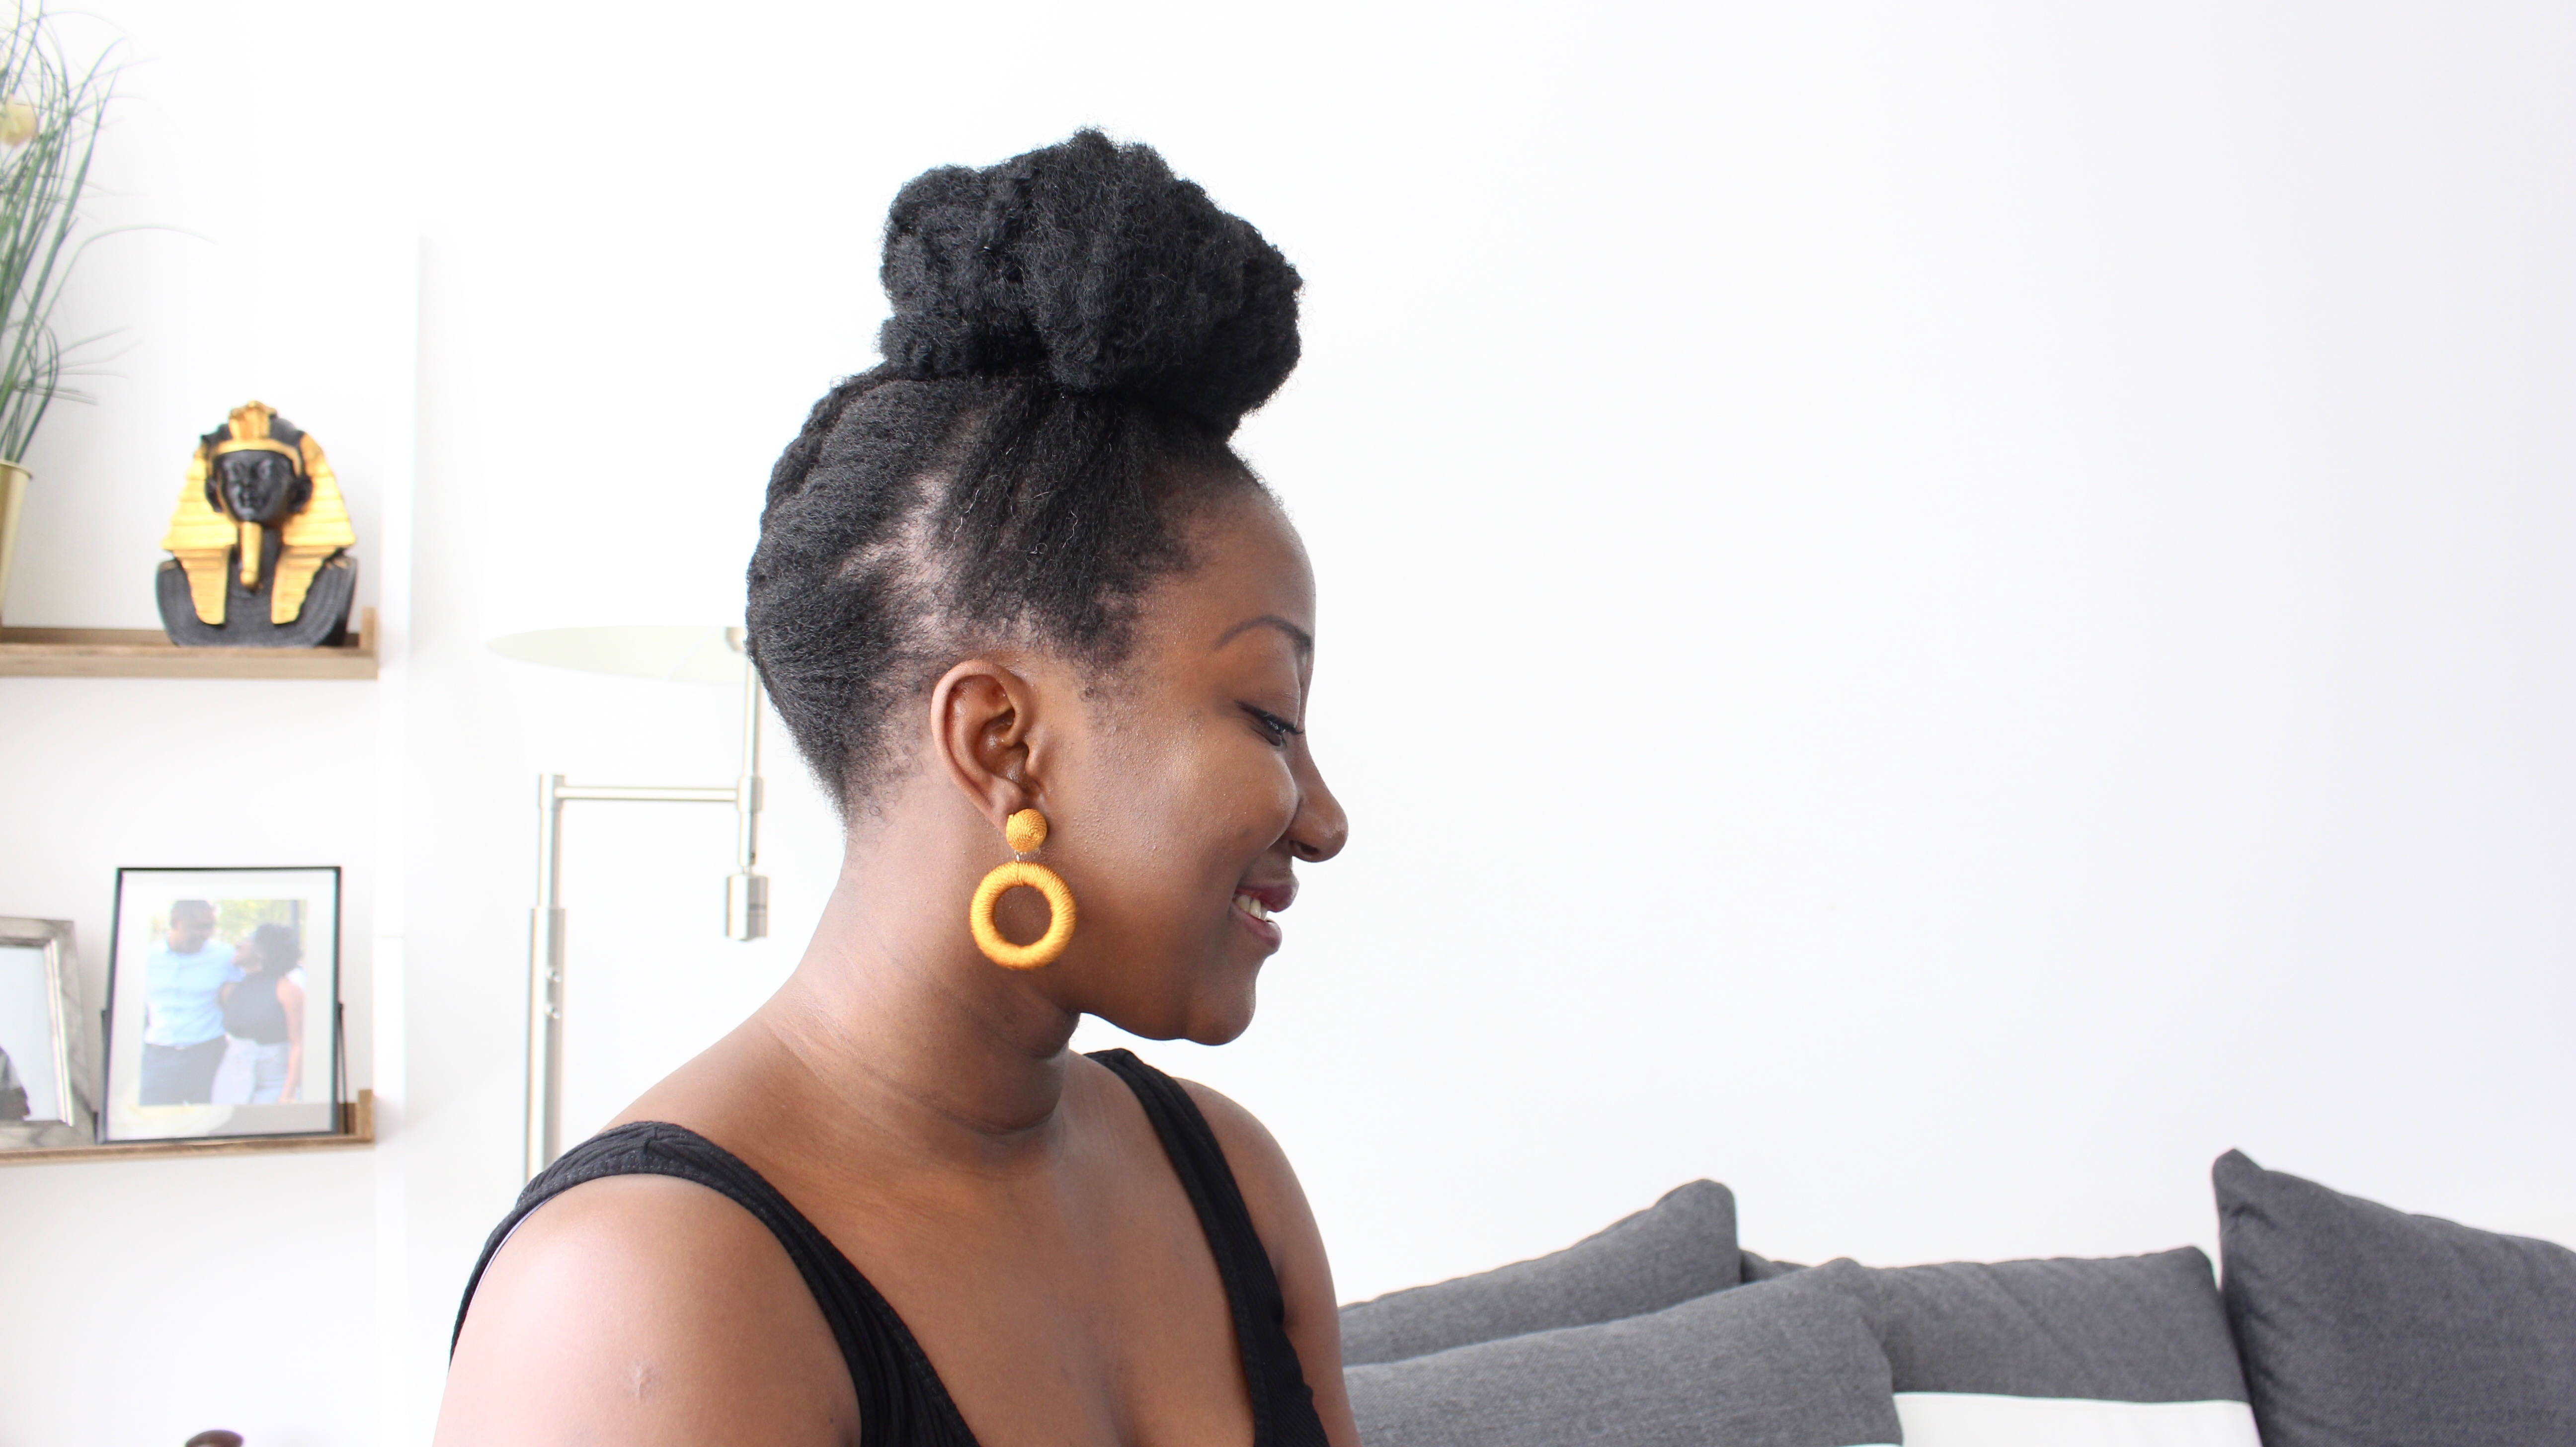 44 Easy Natural Hairstyles You Can Create at Home